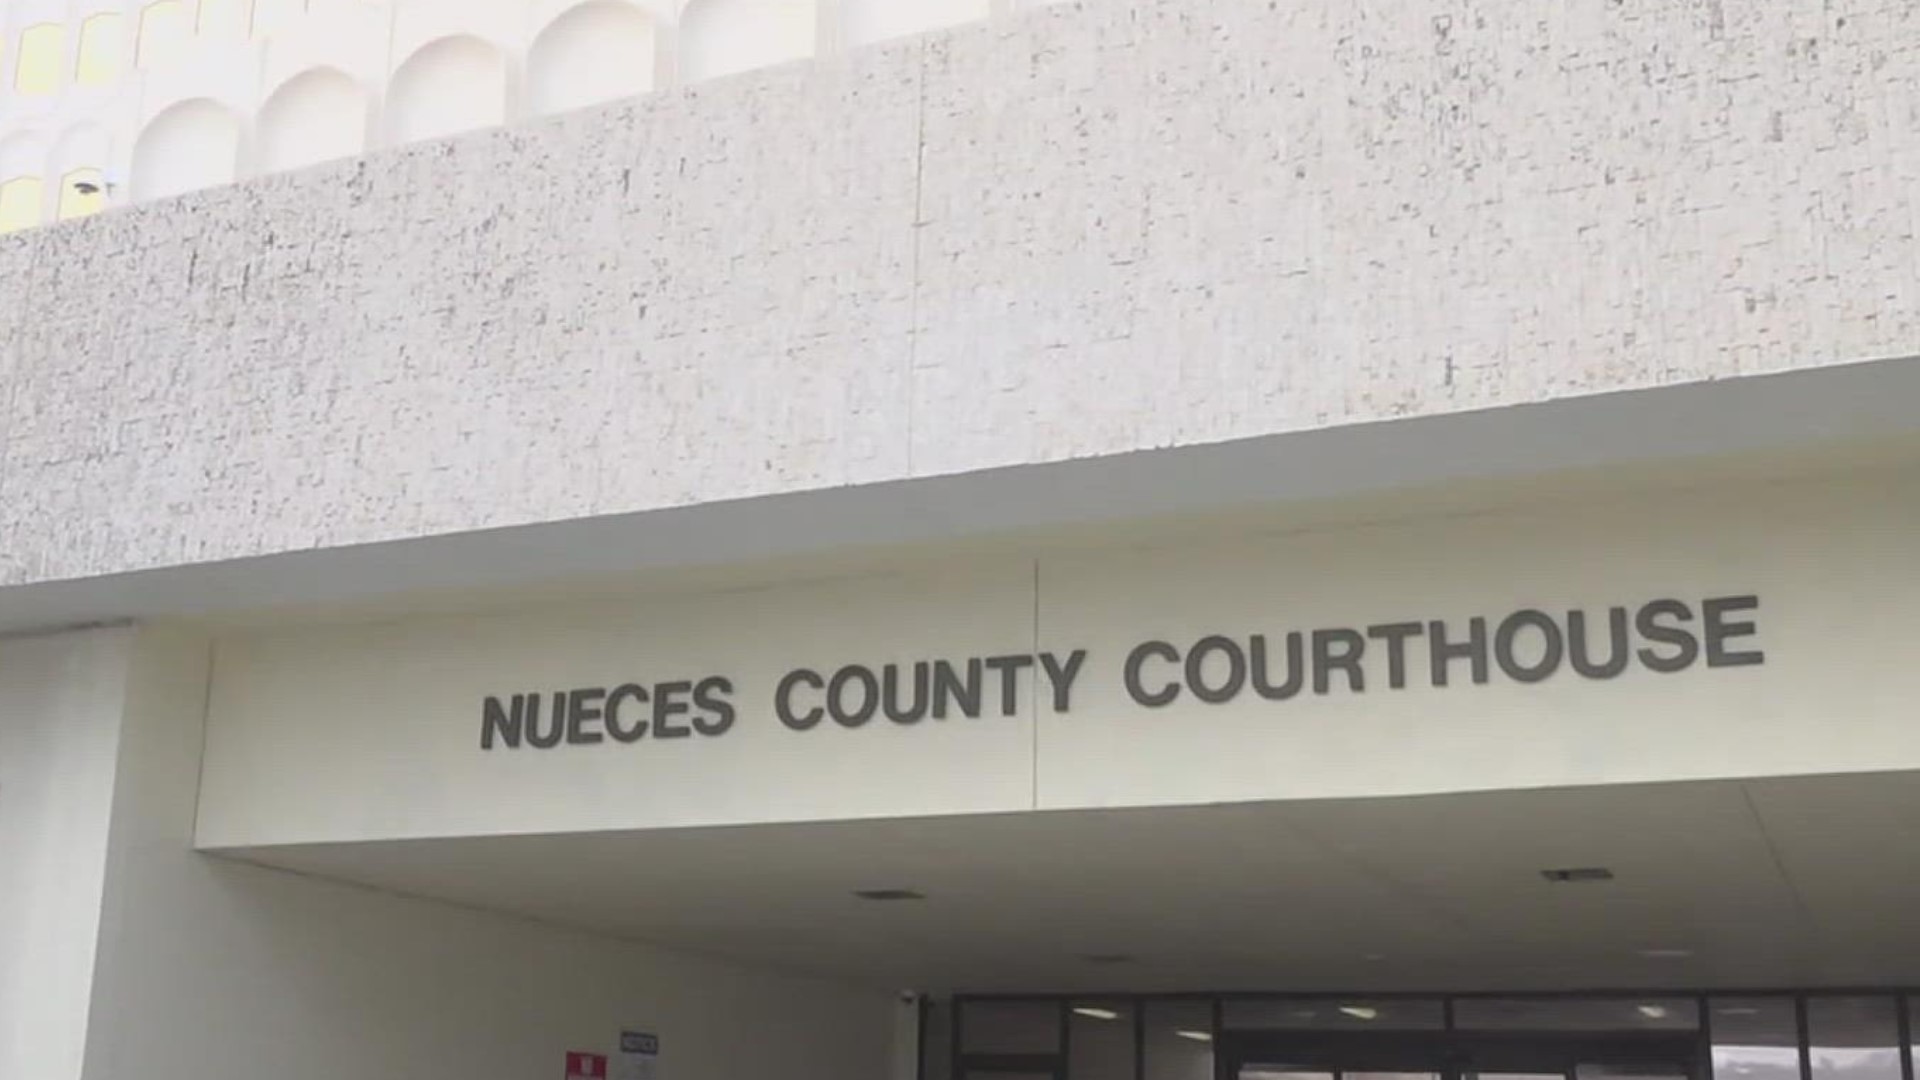 3NEWS' Brandon Schaff spoke with county officials about the possibility of adding two new courts.